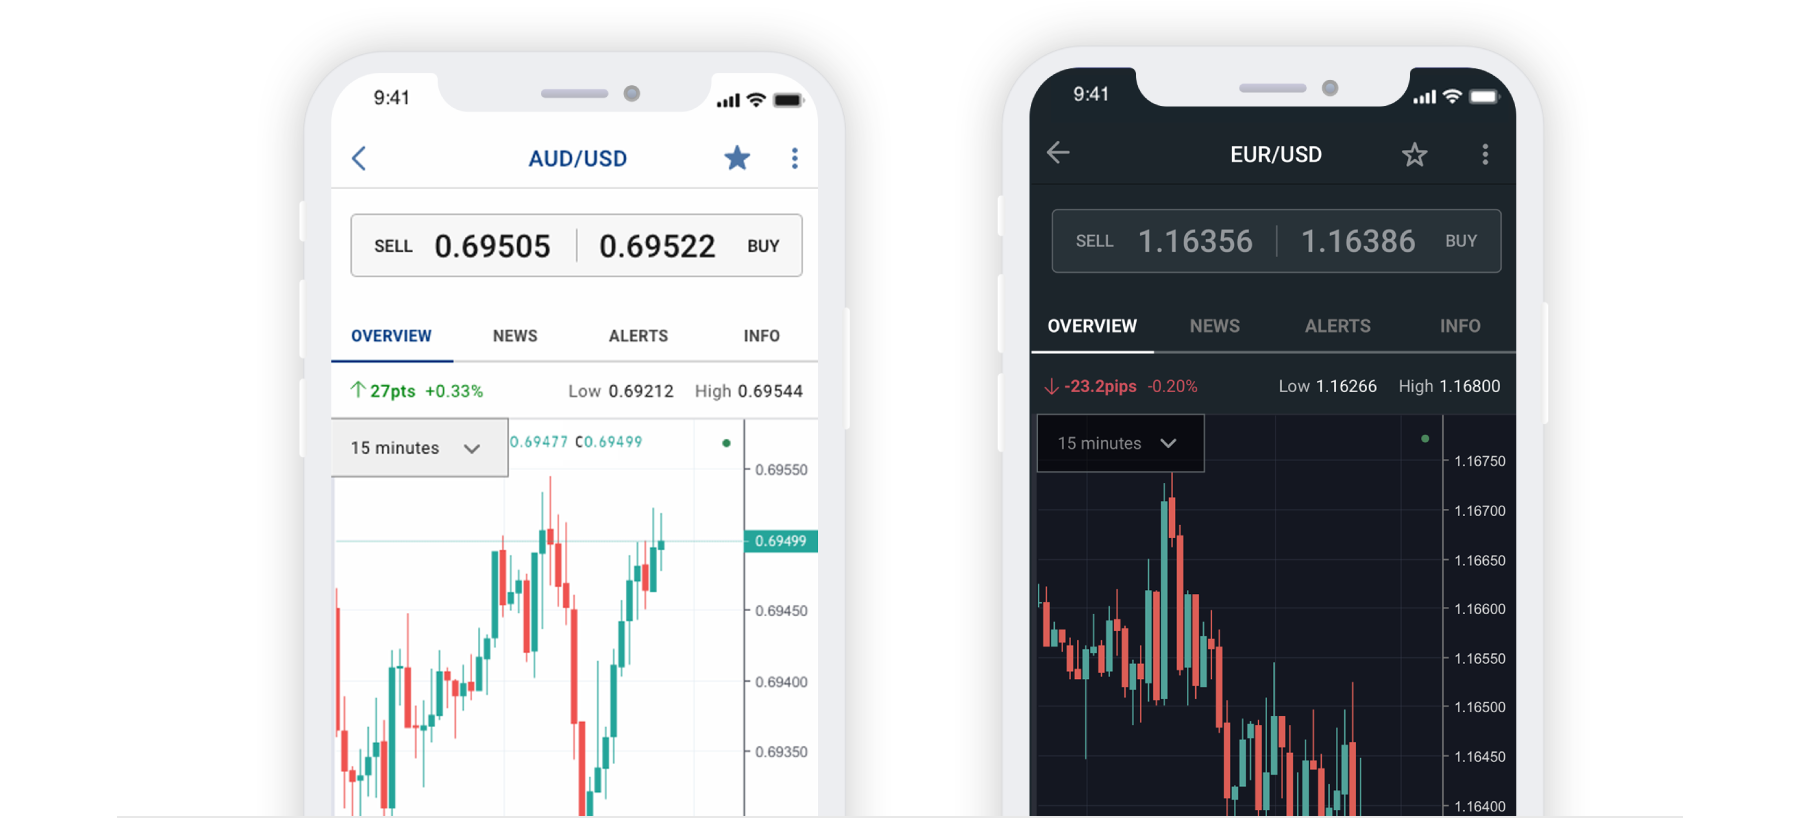 Forexyard mobile trading app cryptos you can buy with usd